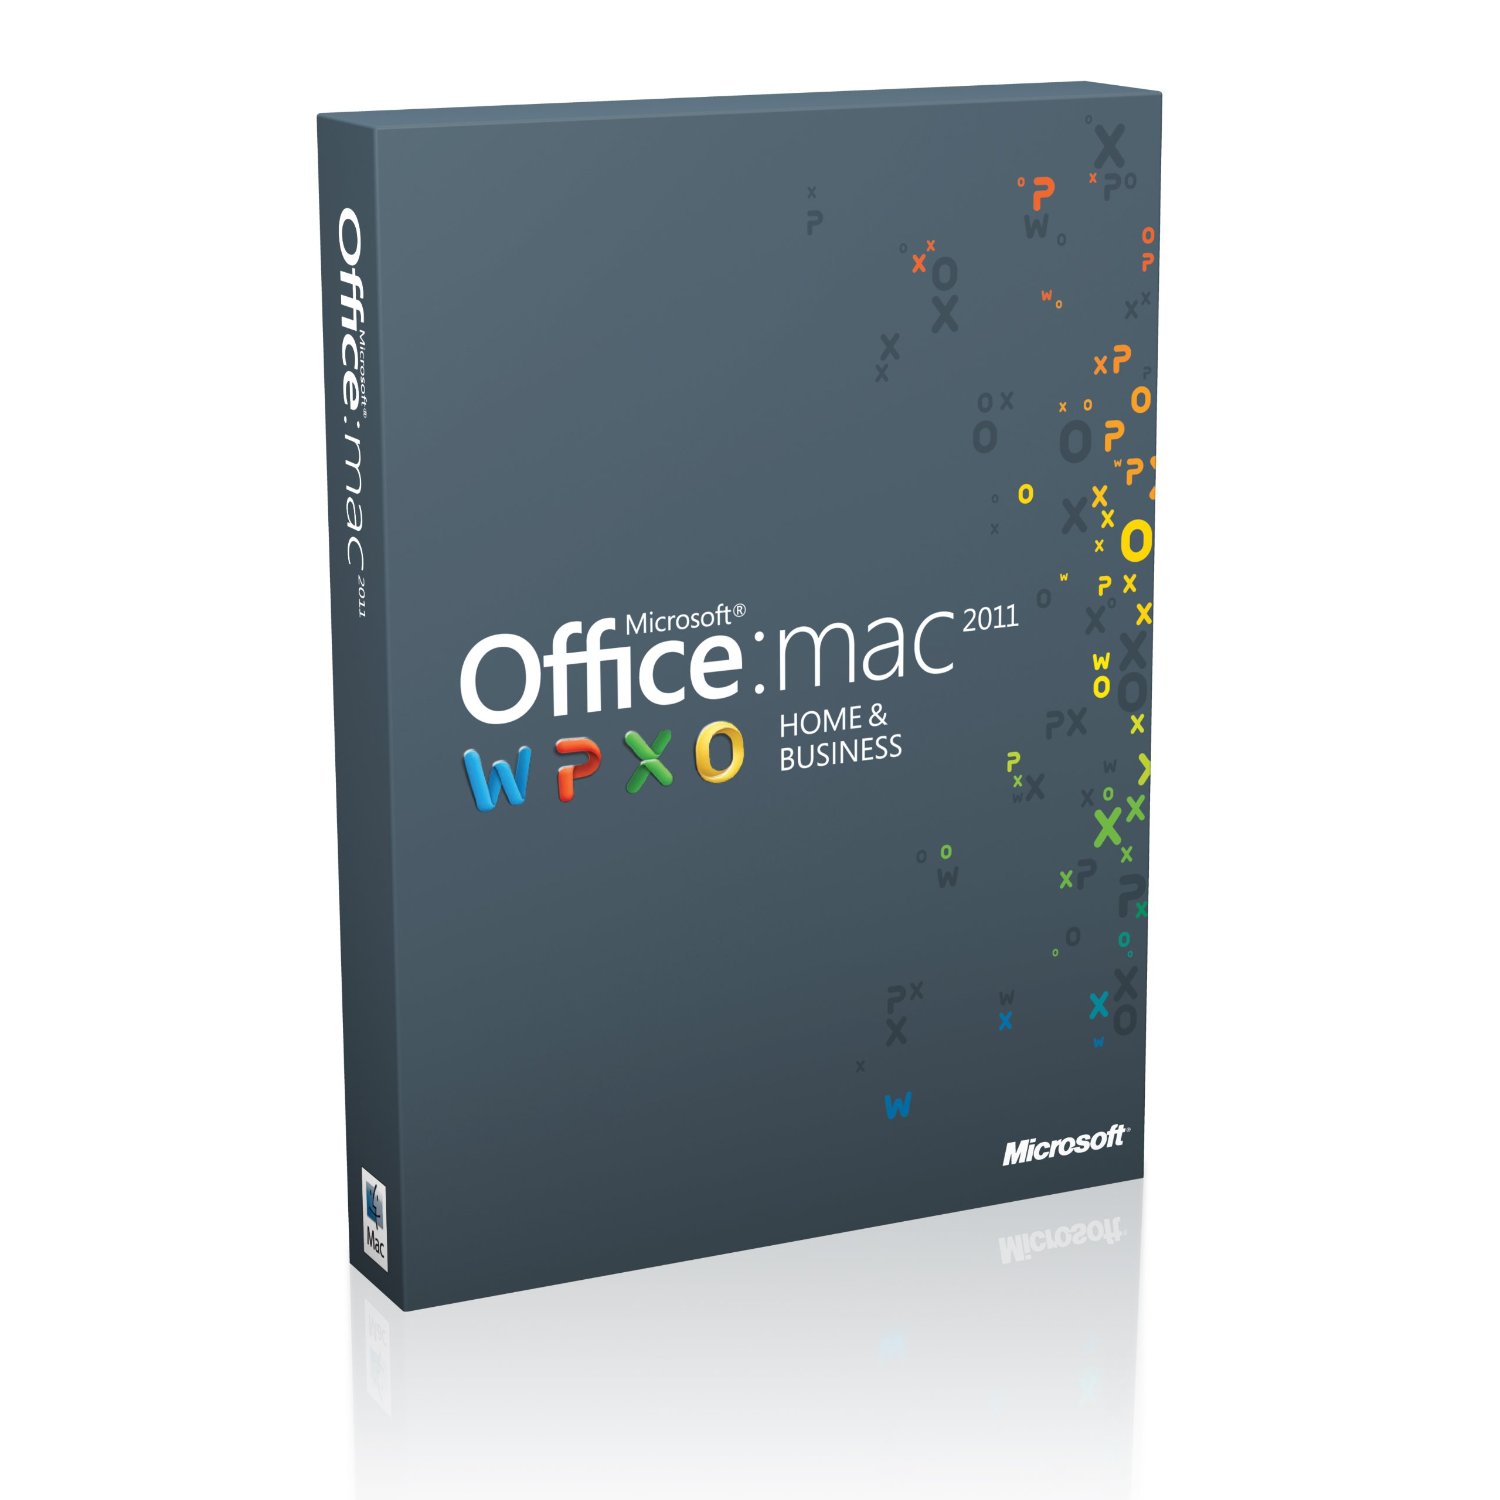 Ms Office Trial Version Free Download For Mac